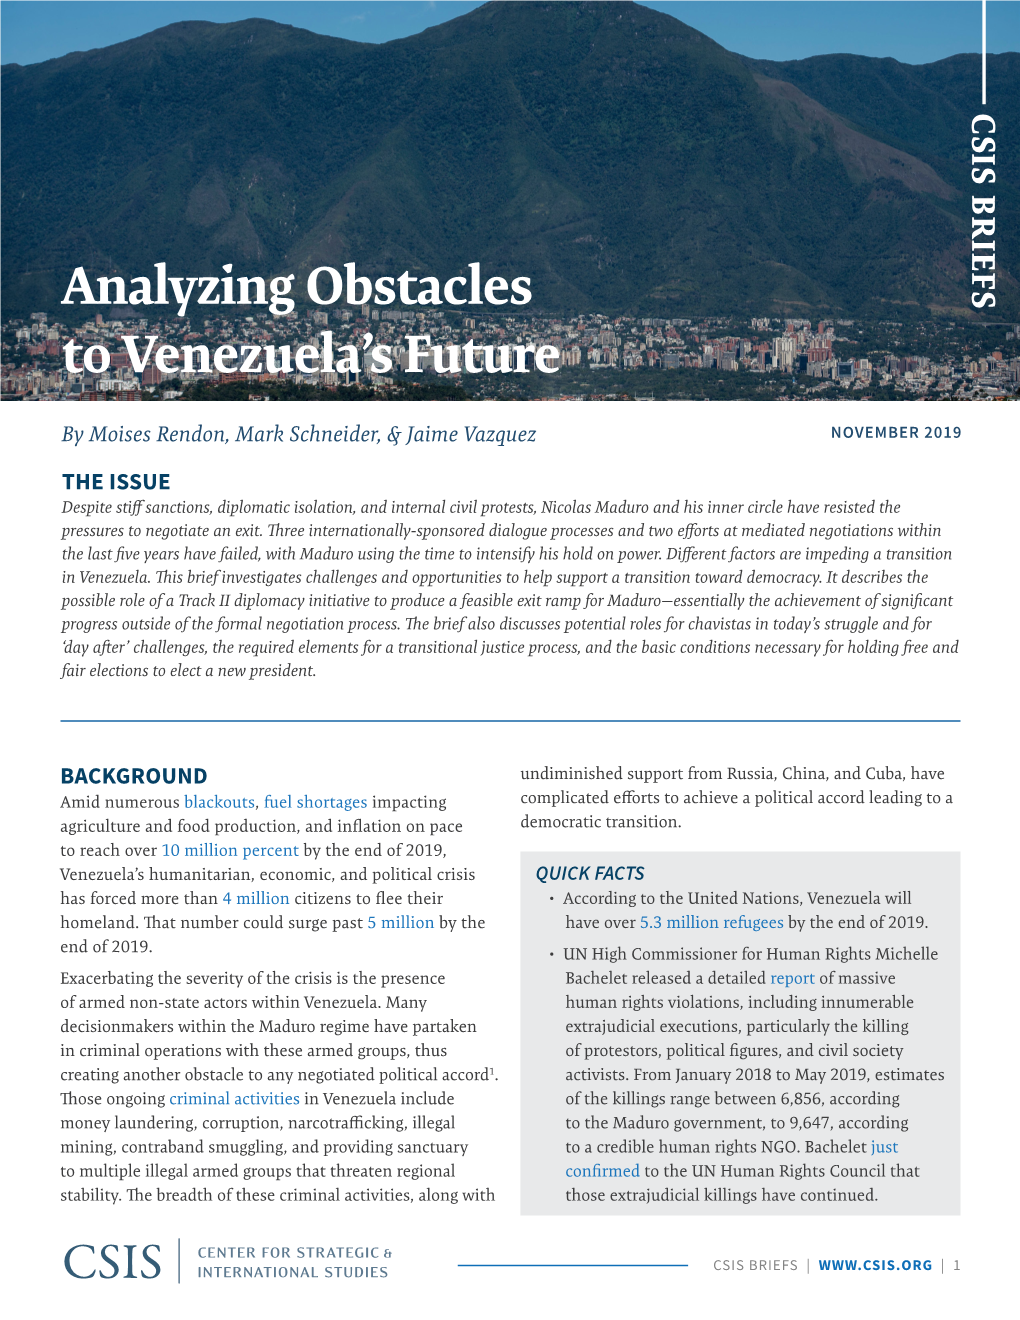 Analyzing Obstacles to Venezuela's Future